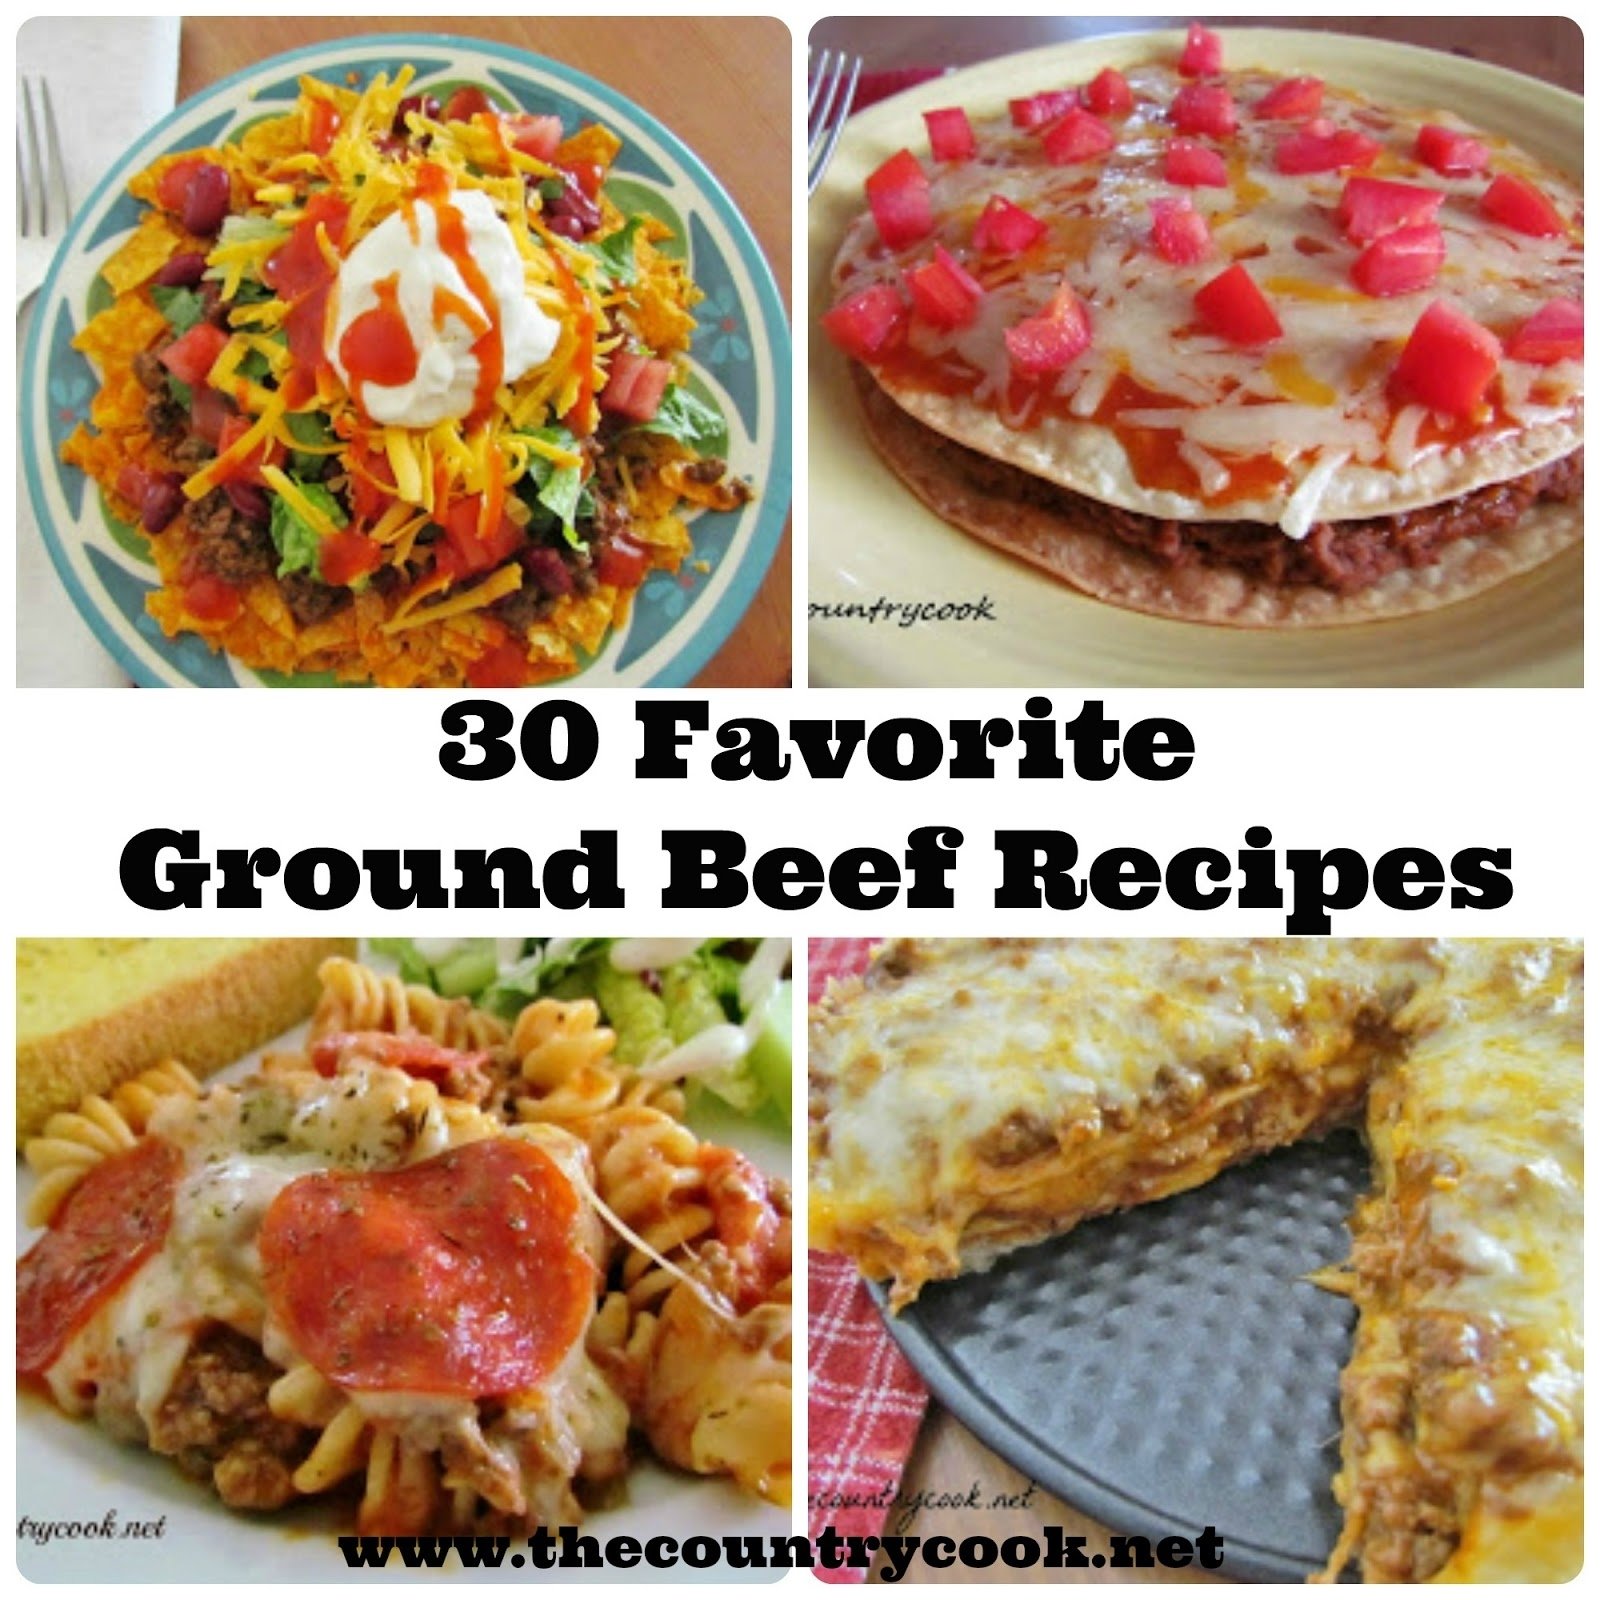 30 Favorite Ground Beef Recipes The Country Cook 12 